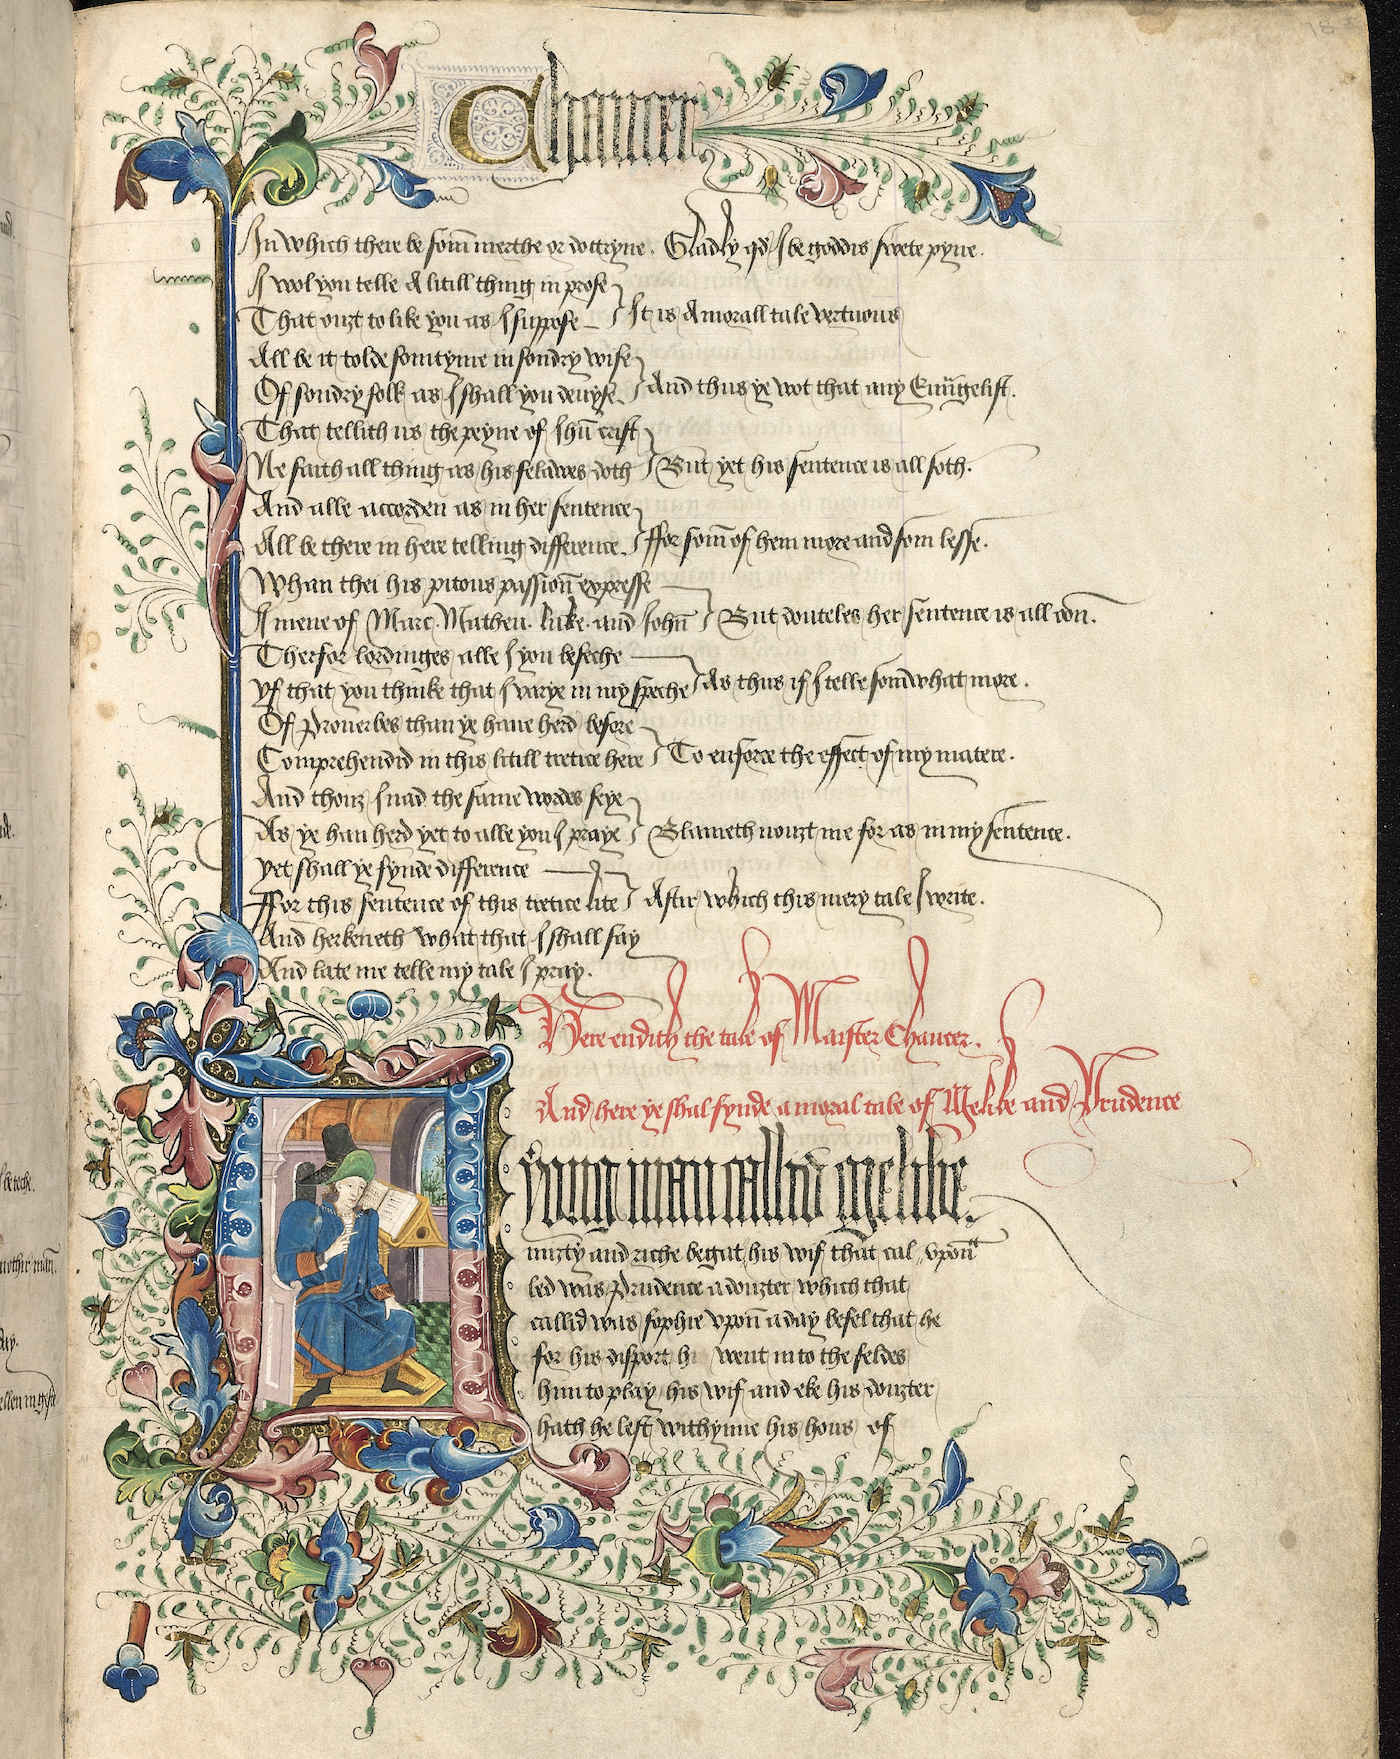 “‘A copy made around the third quarter of the 15th century of Geoffrey Chaucer’s The Canterbury Tales (1390s); at the division between’The Tale of Sir Thopas’ and ‘The Tale of Melibee’, the initial, border, running head and title help the reader to navigate the text.’ (MS. Rawlinson poet. 223, fol. 183r., courtesy Bodleian Libraries, University of Oxford)”; rubrication marks ‘the end’.